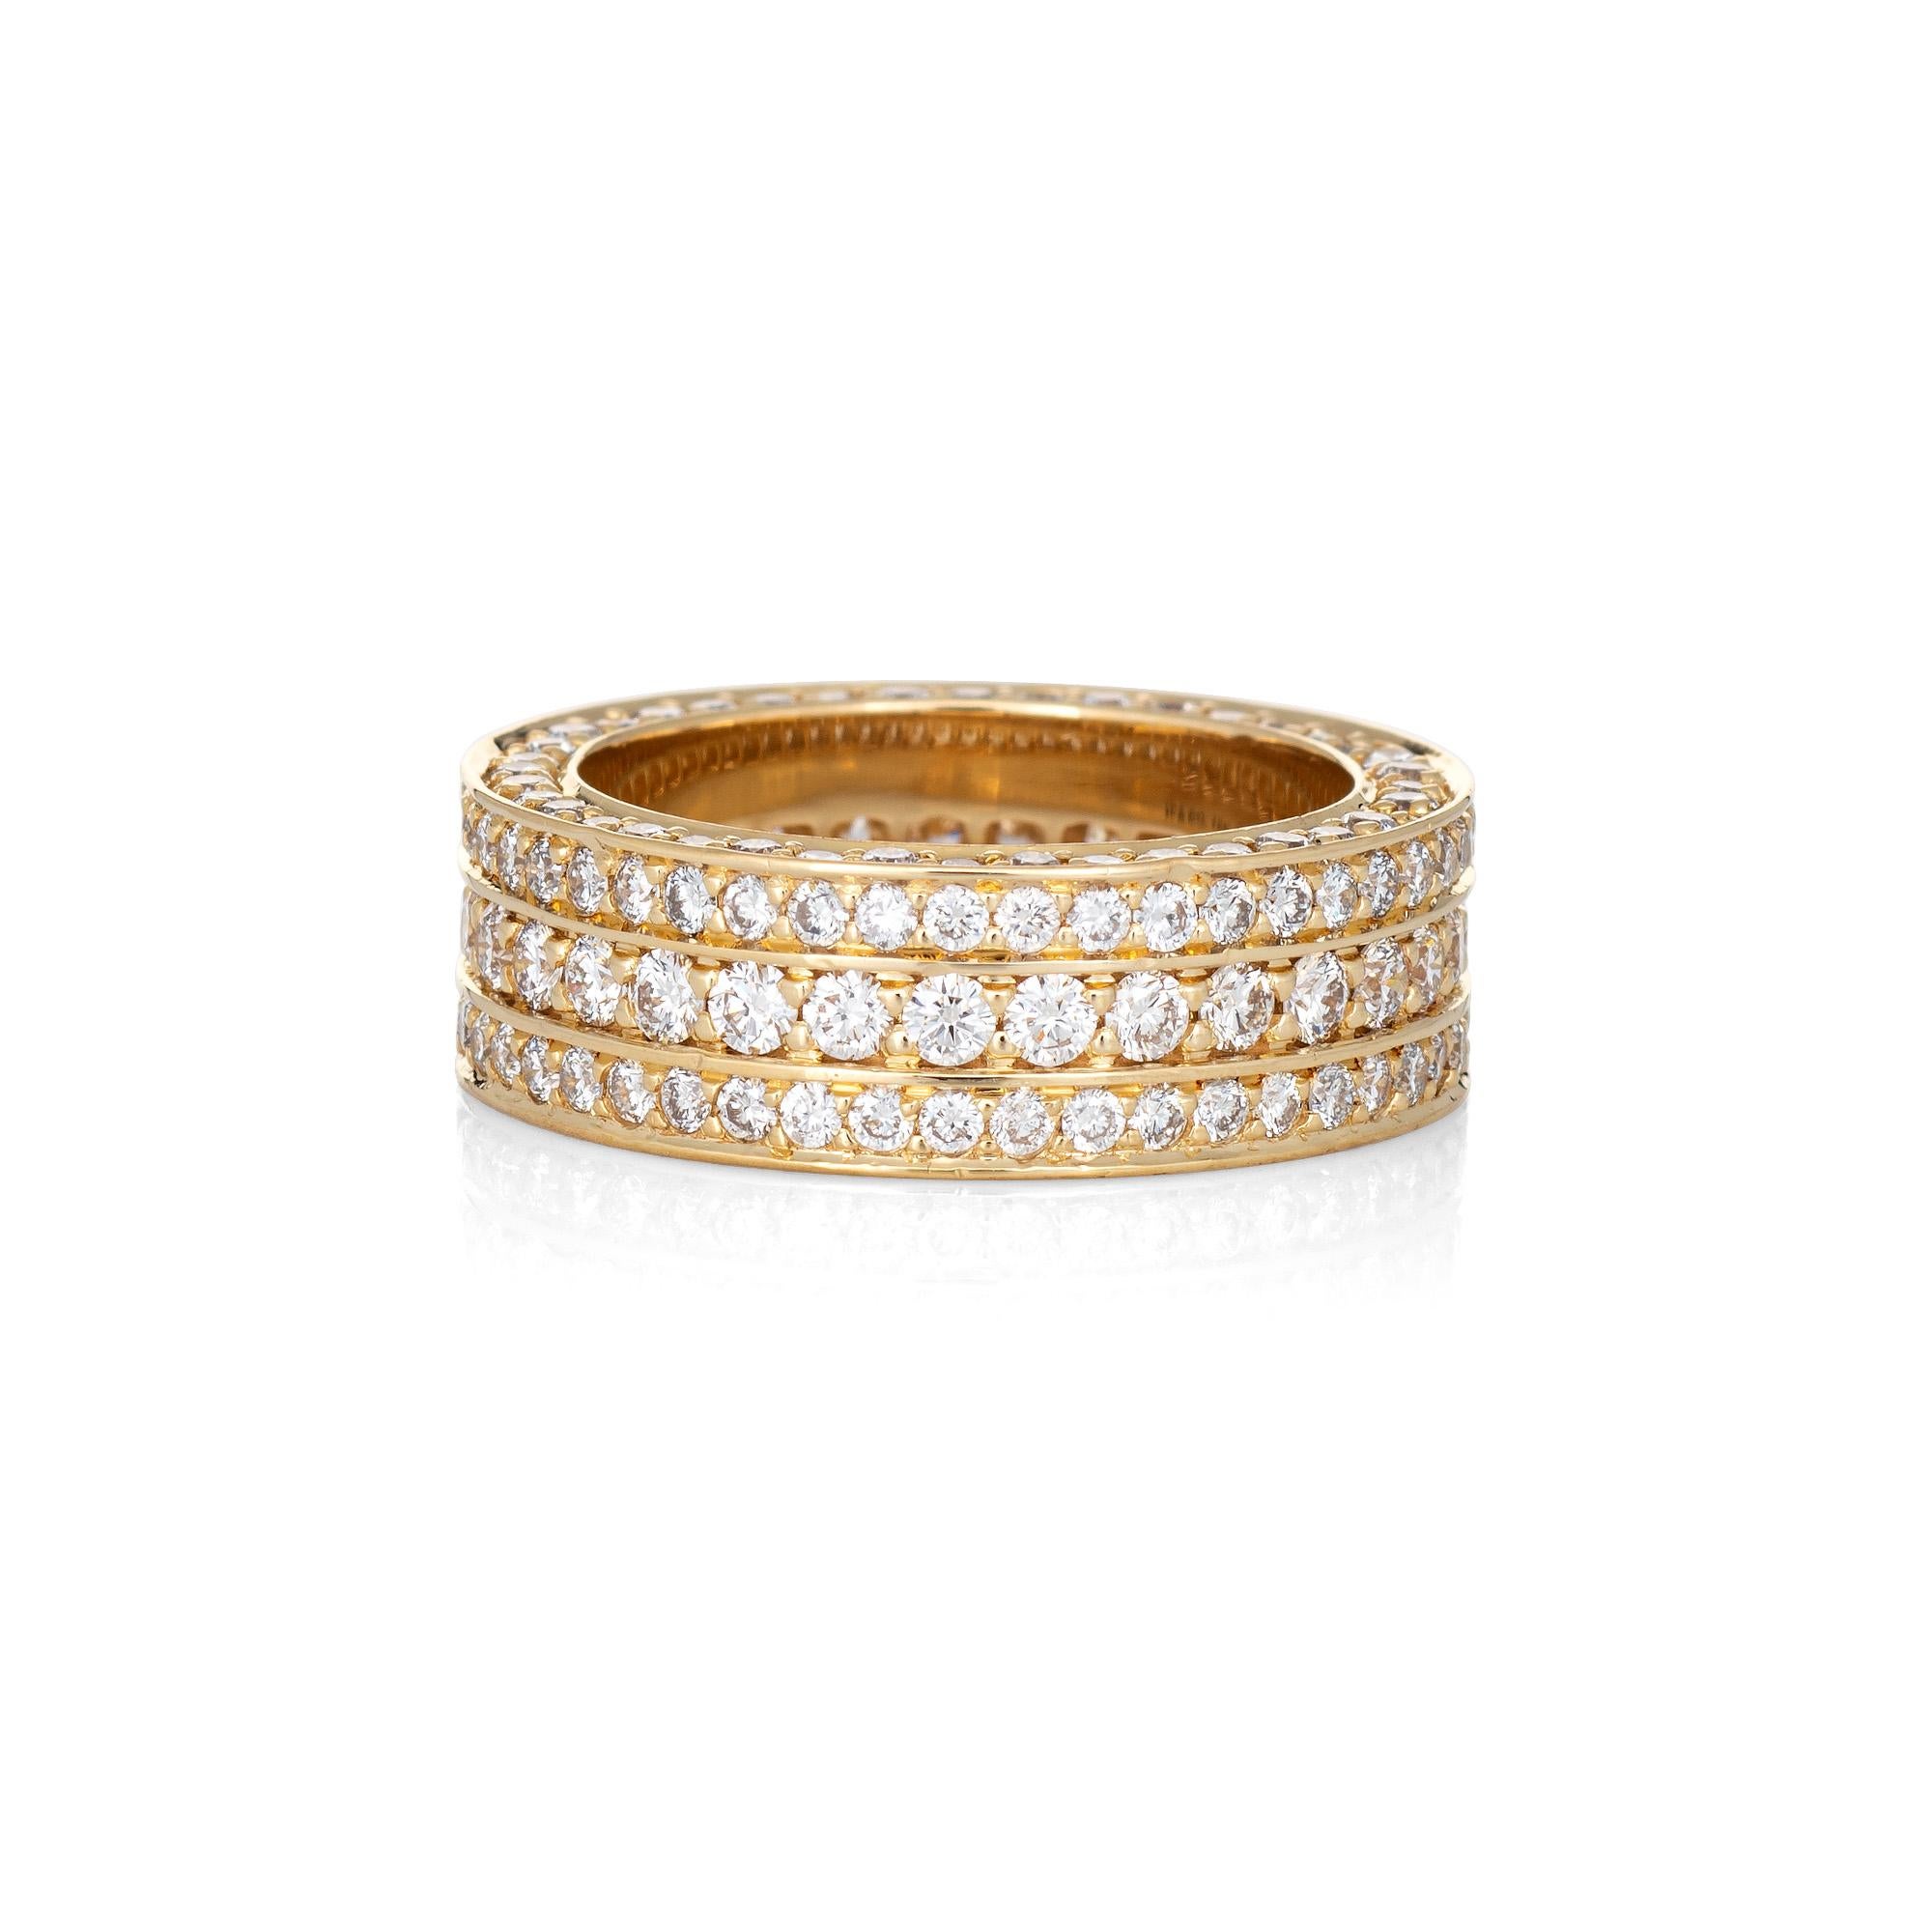 Stylish Millo Enzo diamond eternity ring crafted in 18 karat yellow gold. 

Round brilliant cut diamonds total an estimated 3.50 carats (estimated at H-I color and VS2-SI1 clarity). 

The ring is made by IF & Co, a Los Angeles based jeweler known